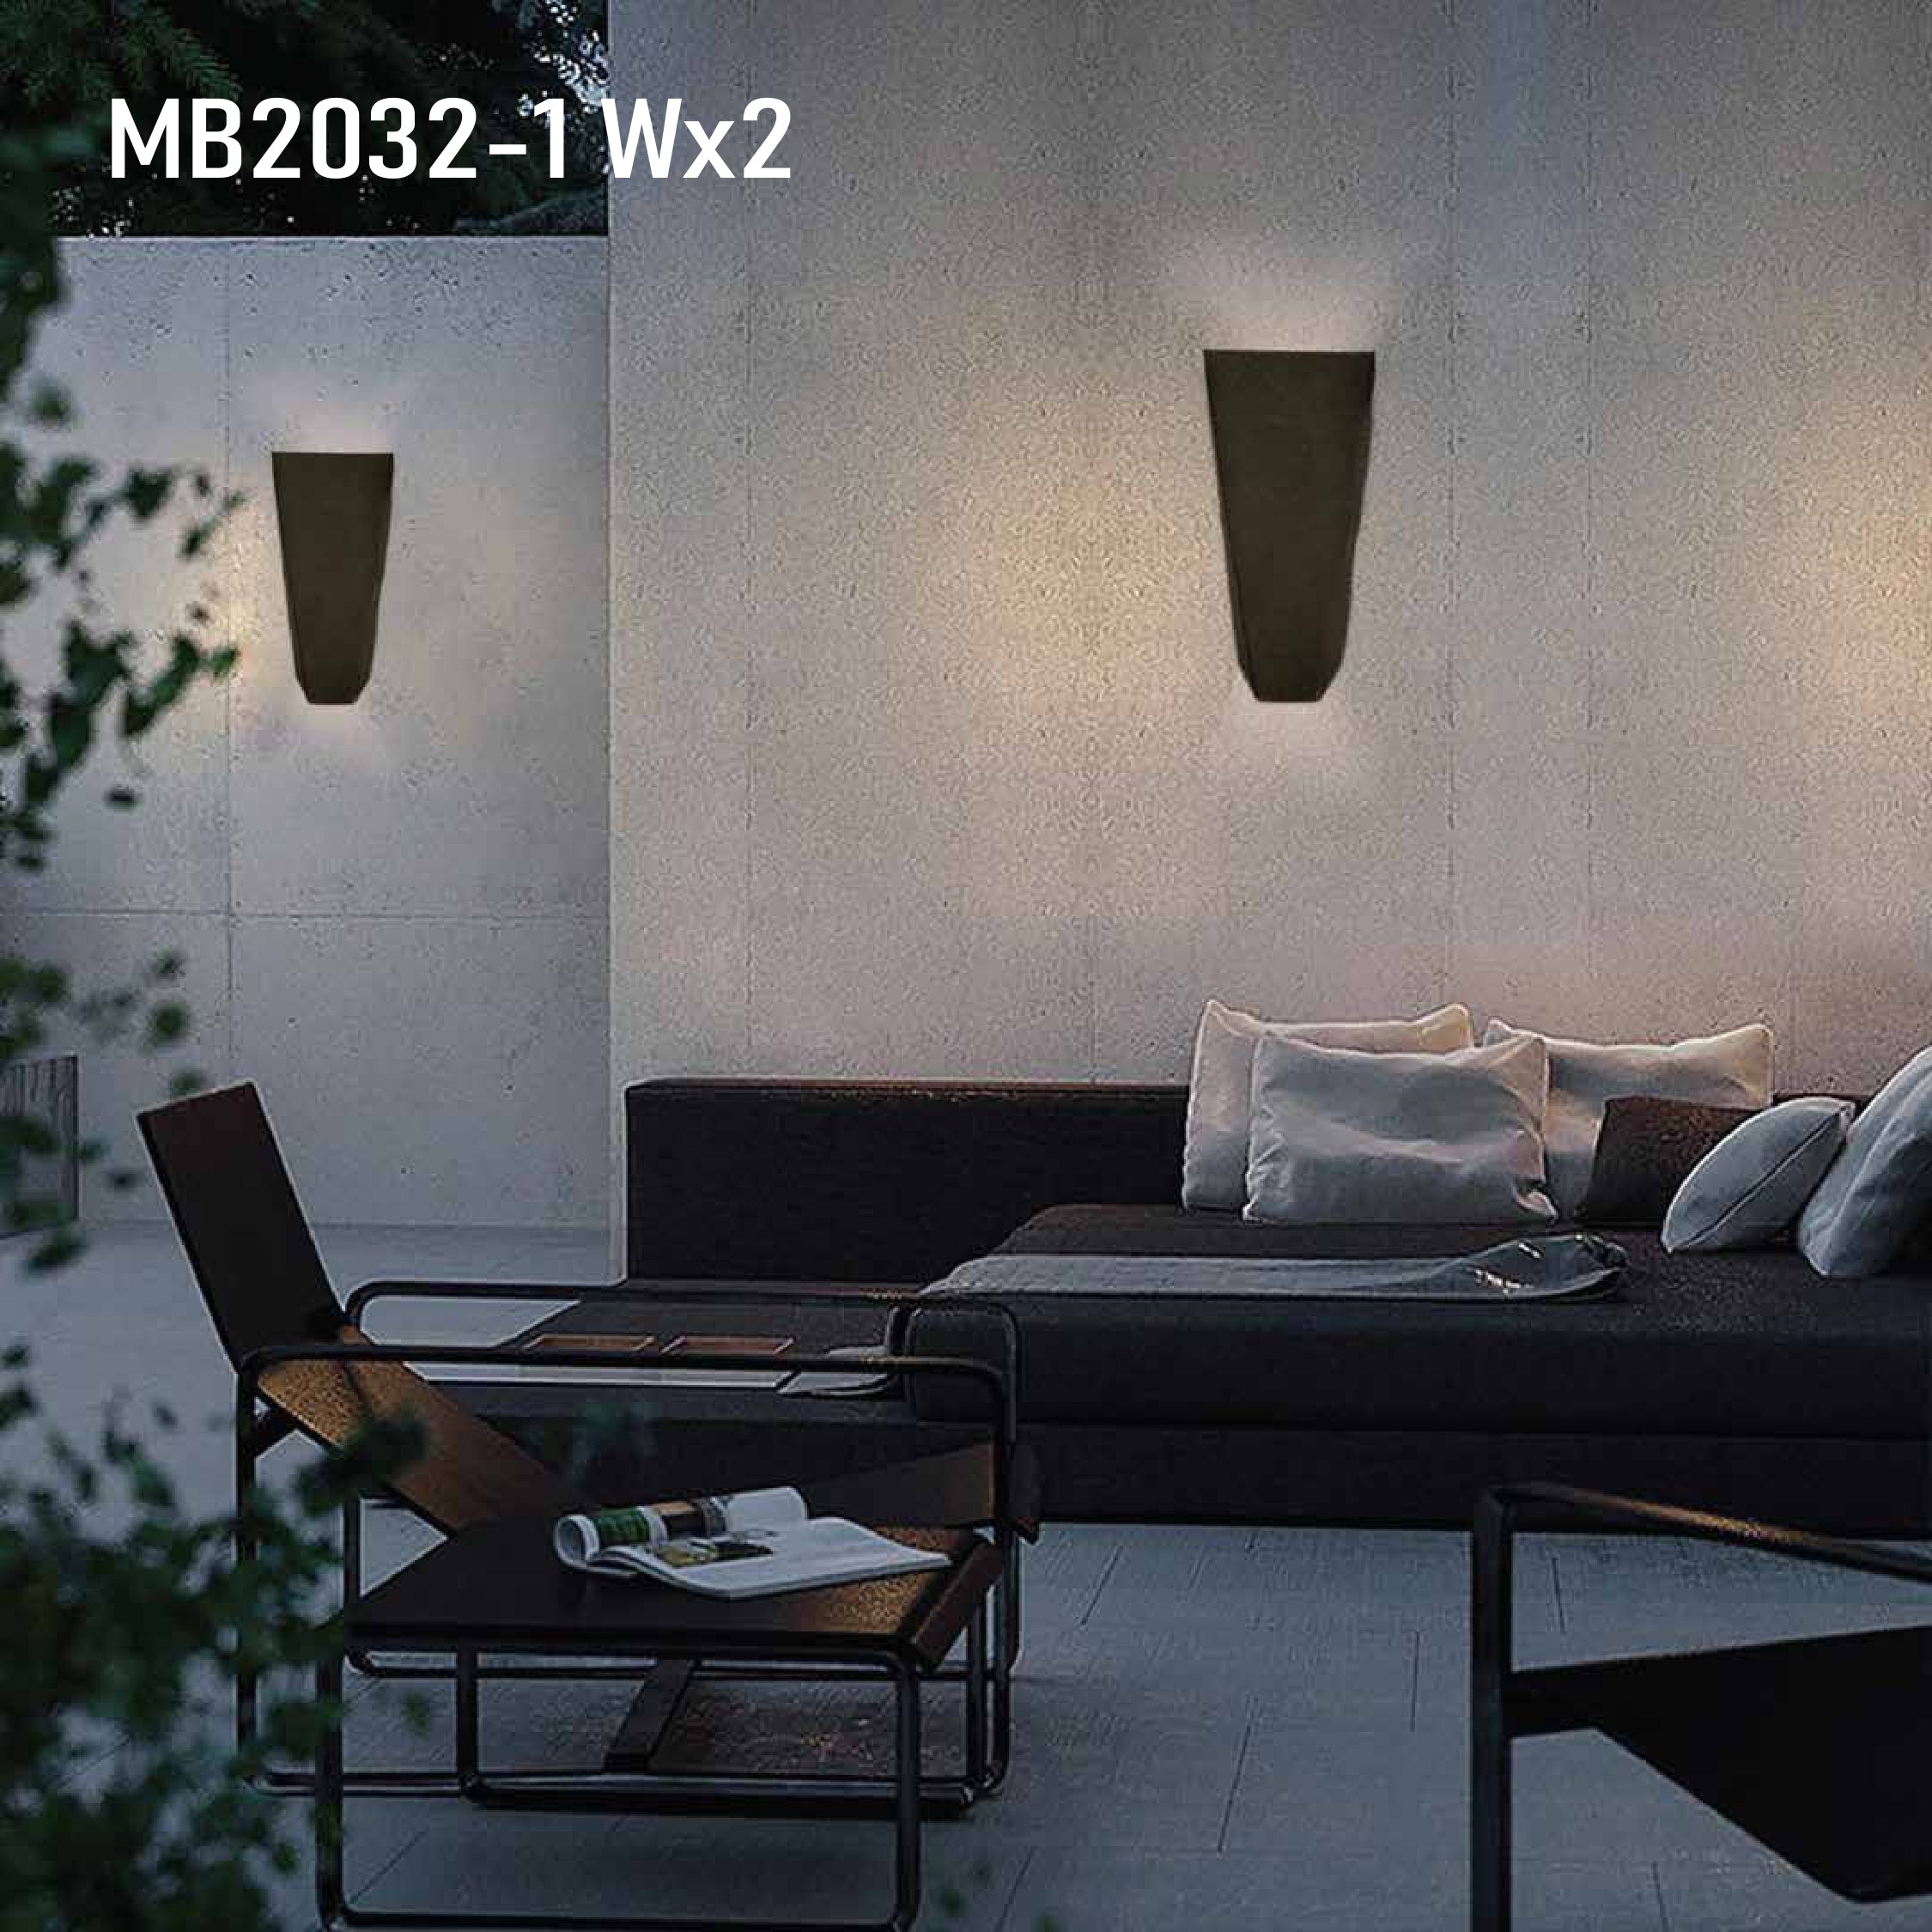 LED Outdoor Wall Light | MB2032-1WX2